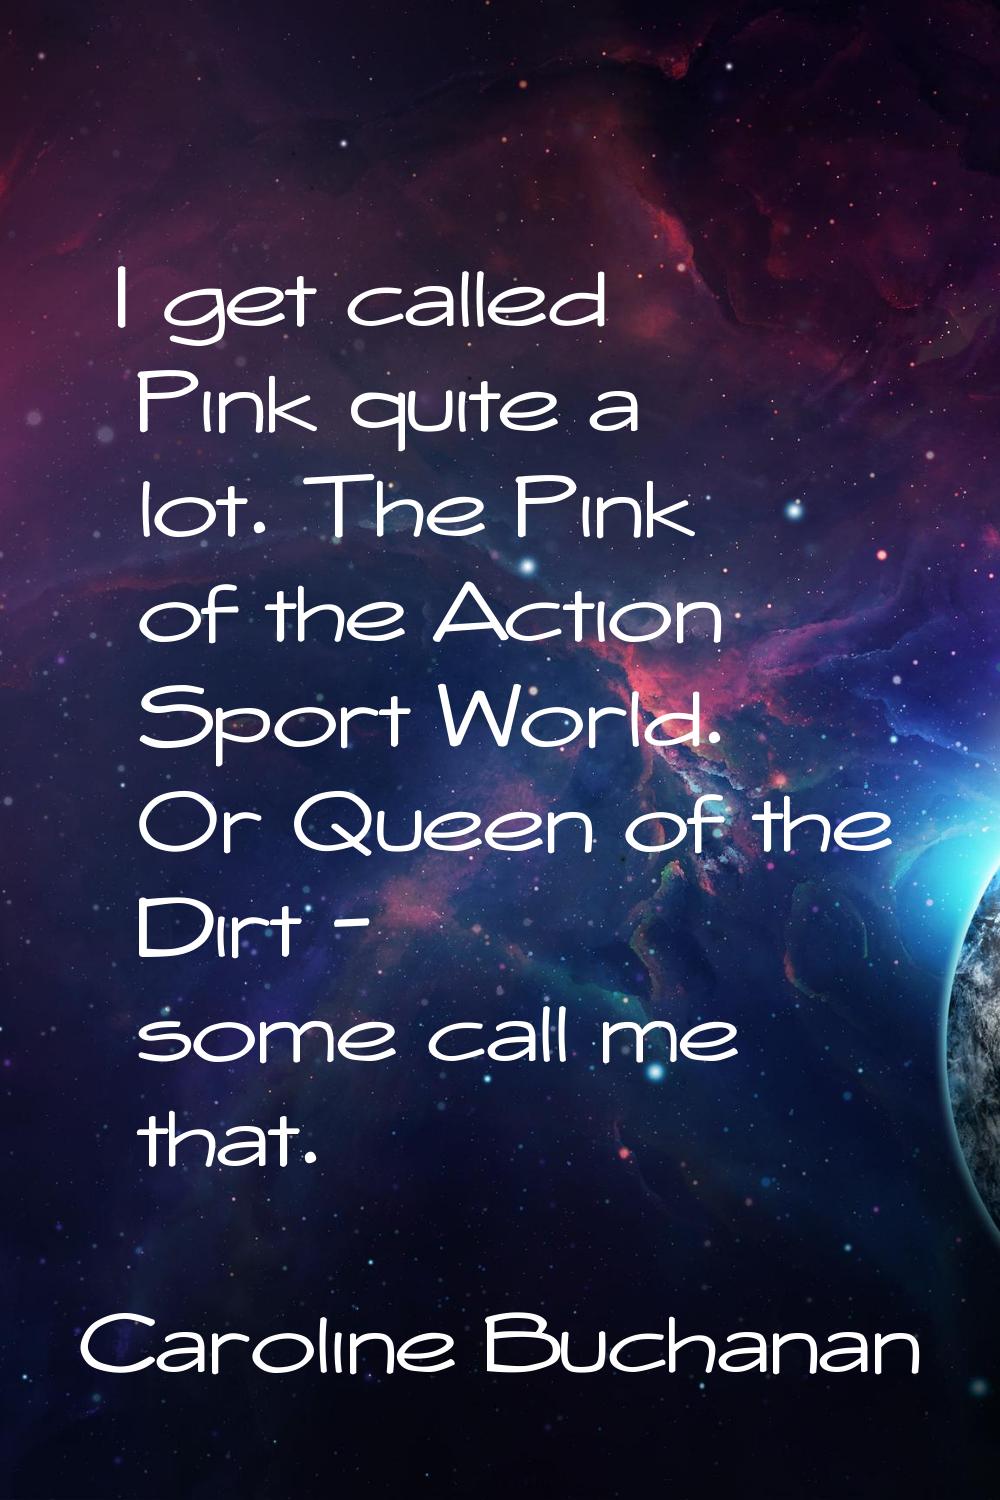 I get called Pink quite a lot. The Pink of the Action Sport World. Or Queen of the Dirt - some call